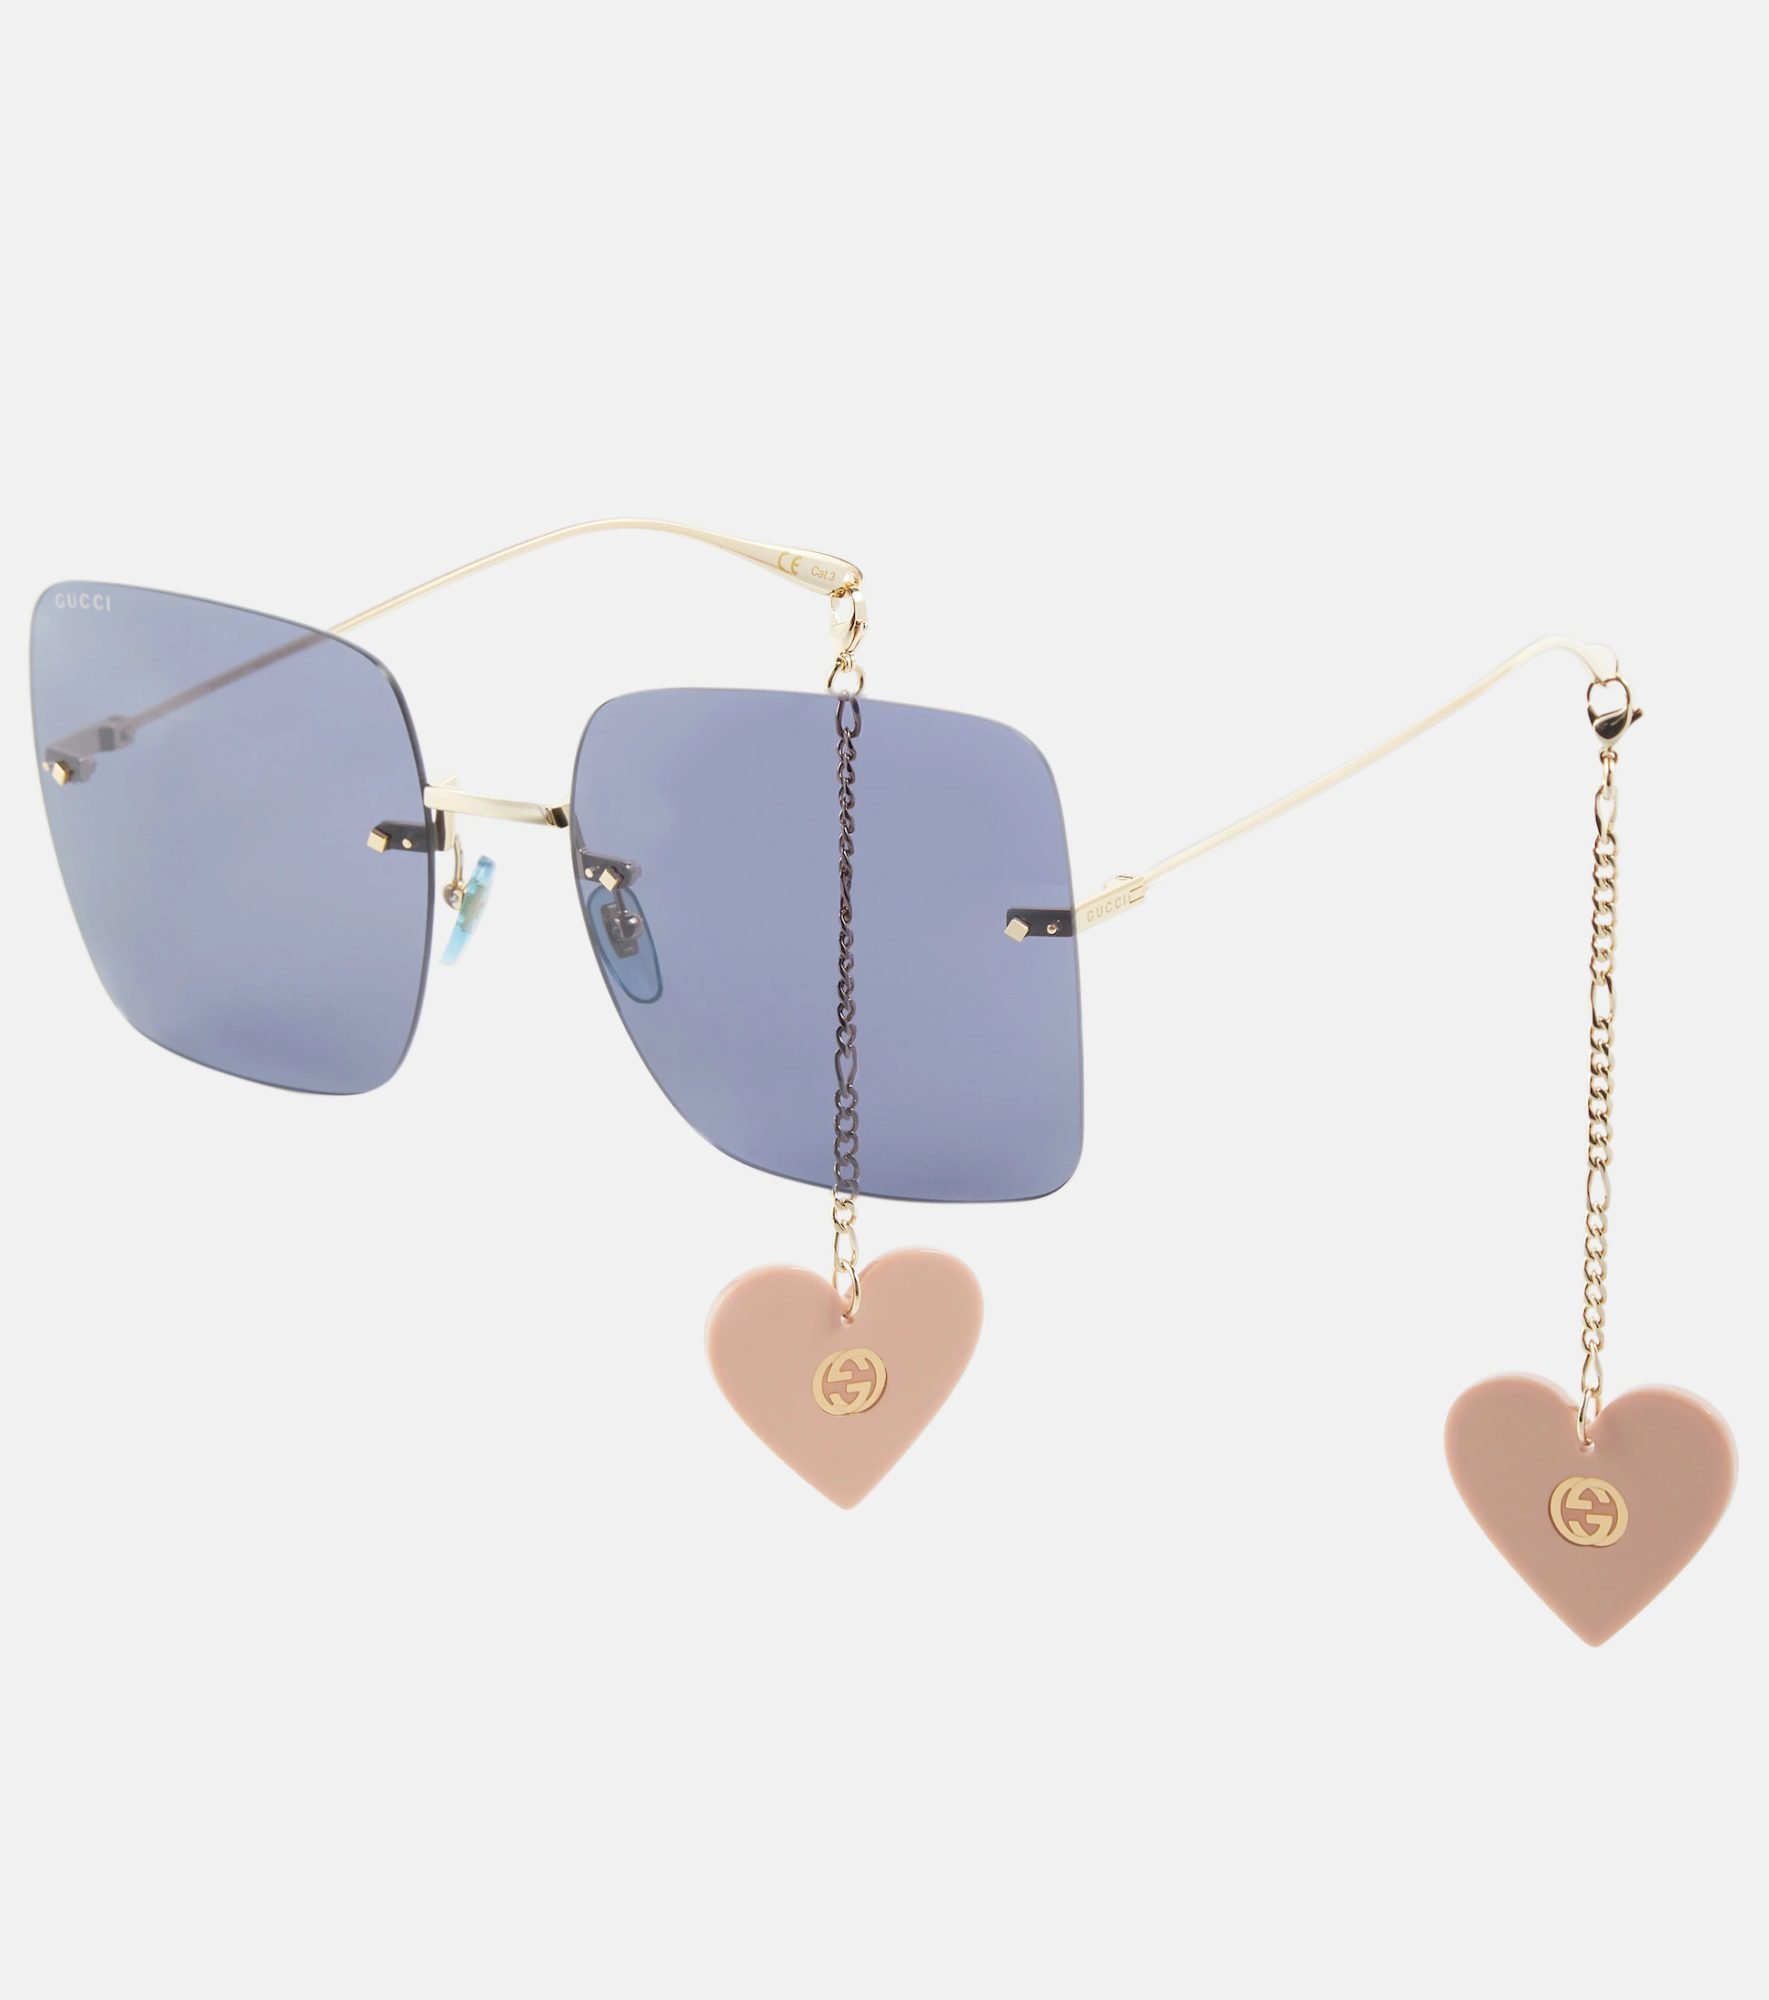 Gucci oversized pink sunglasses with removable heart chain